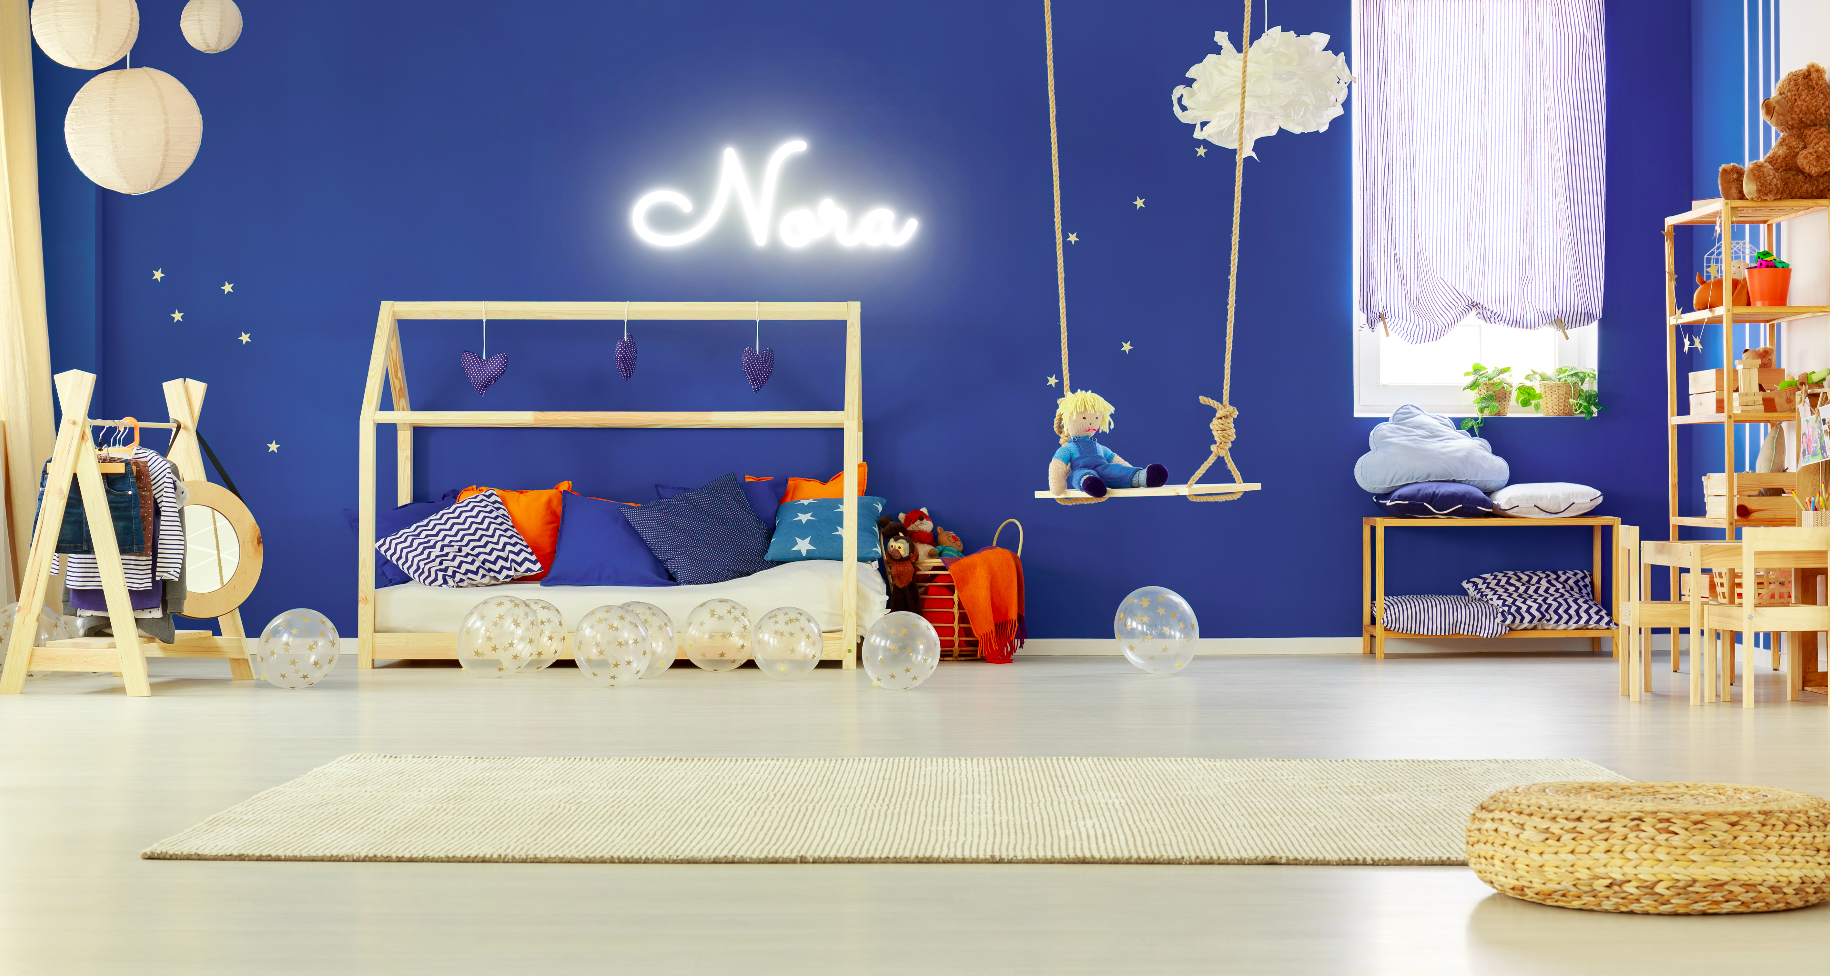 "Nora" Baby Name LED Neon Sign